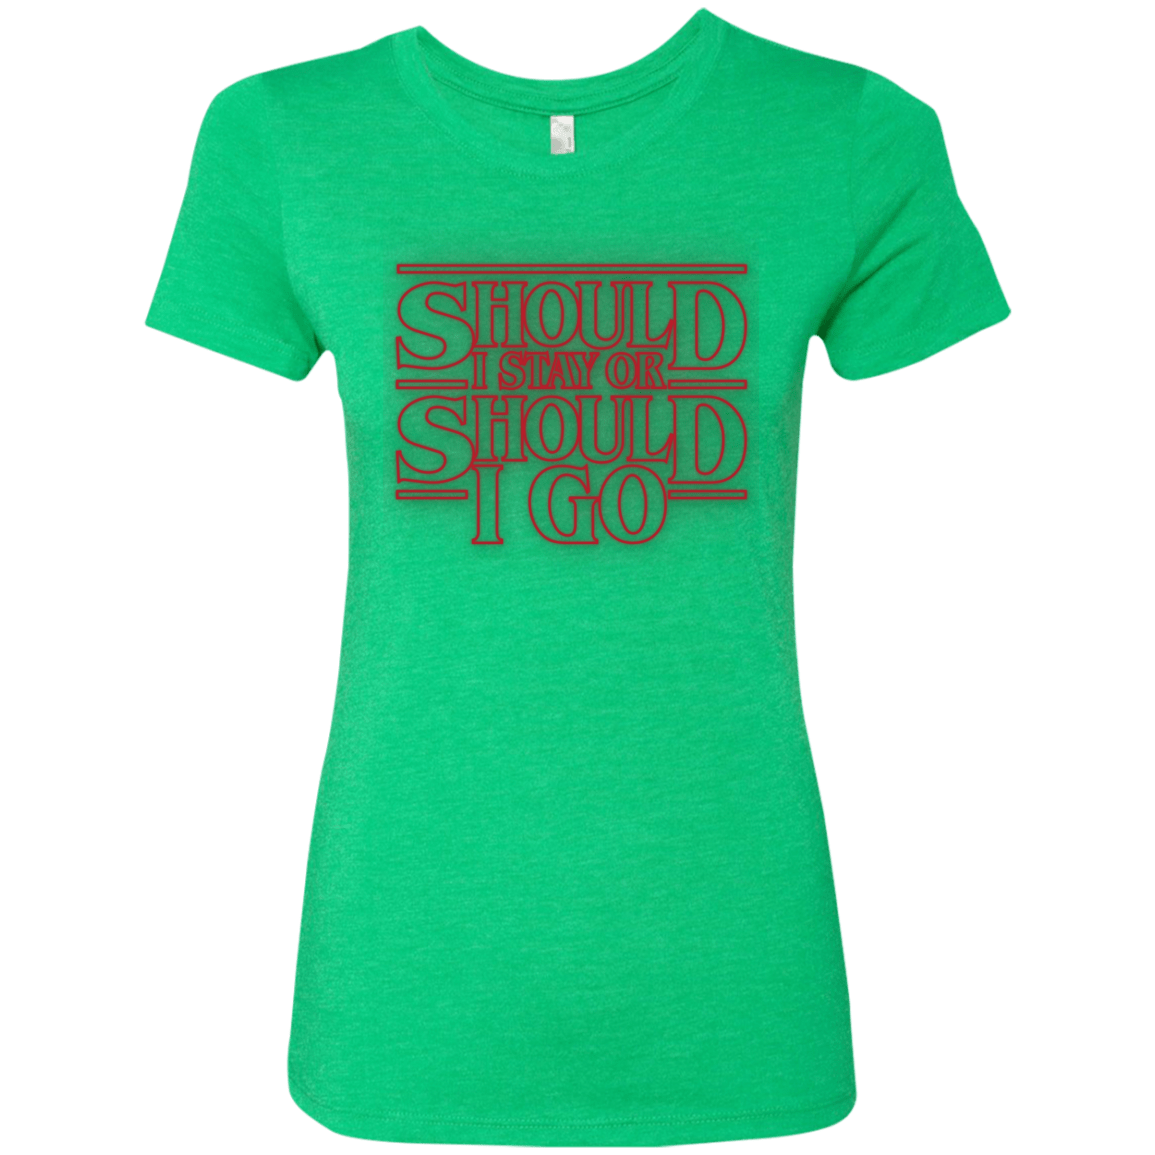 T-Shirts Envy / Small Should I Stay Or Should I Go Women's Triblend T-Shirt